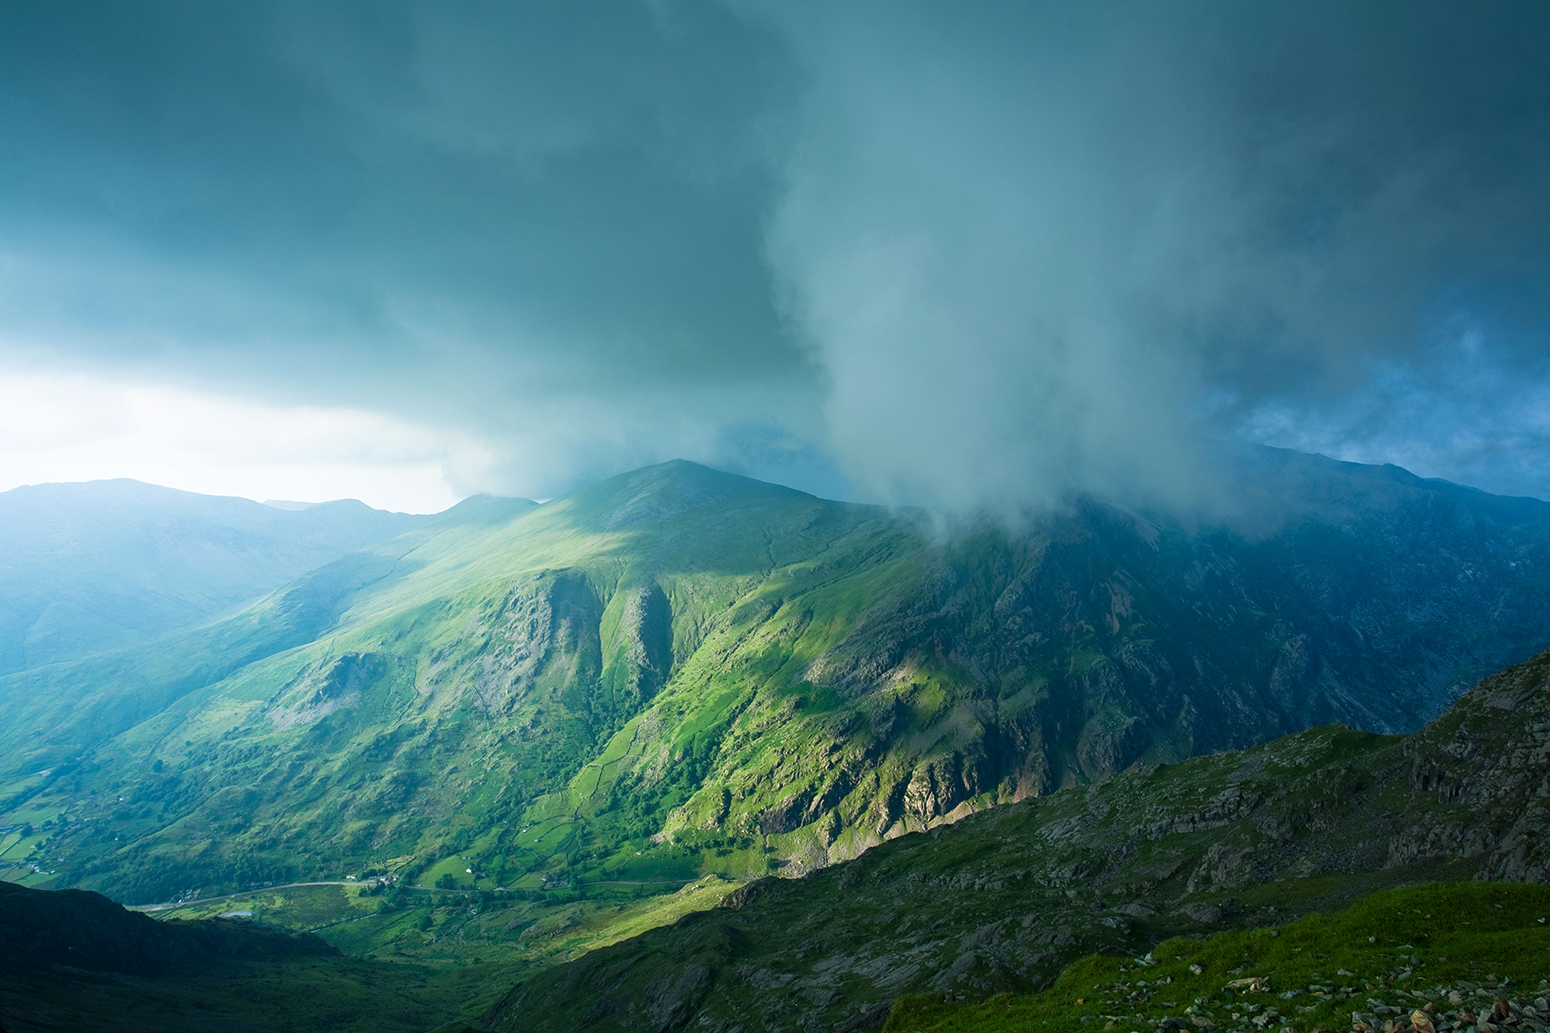 Storm clouds rolling in over Glyder Fawr, Snowdonia, Wales, 06/2009. Credit: Nature Photographers Ltd/Alamy Stock Photo.